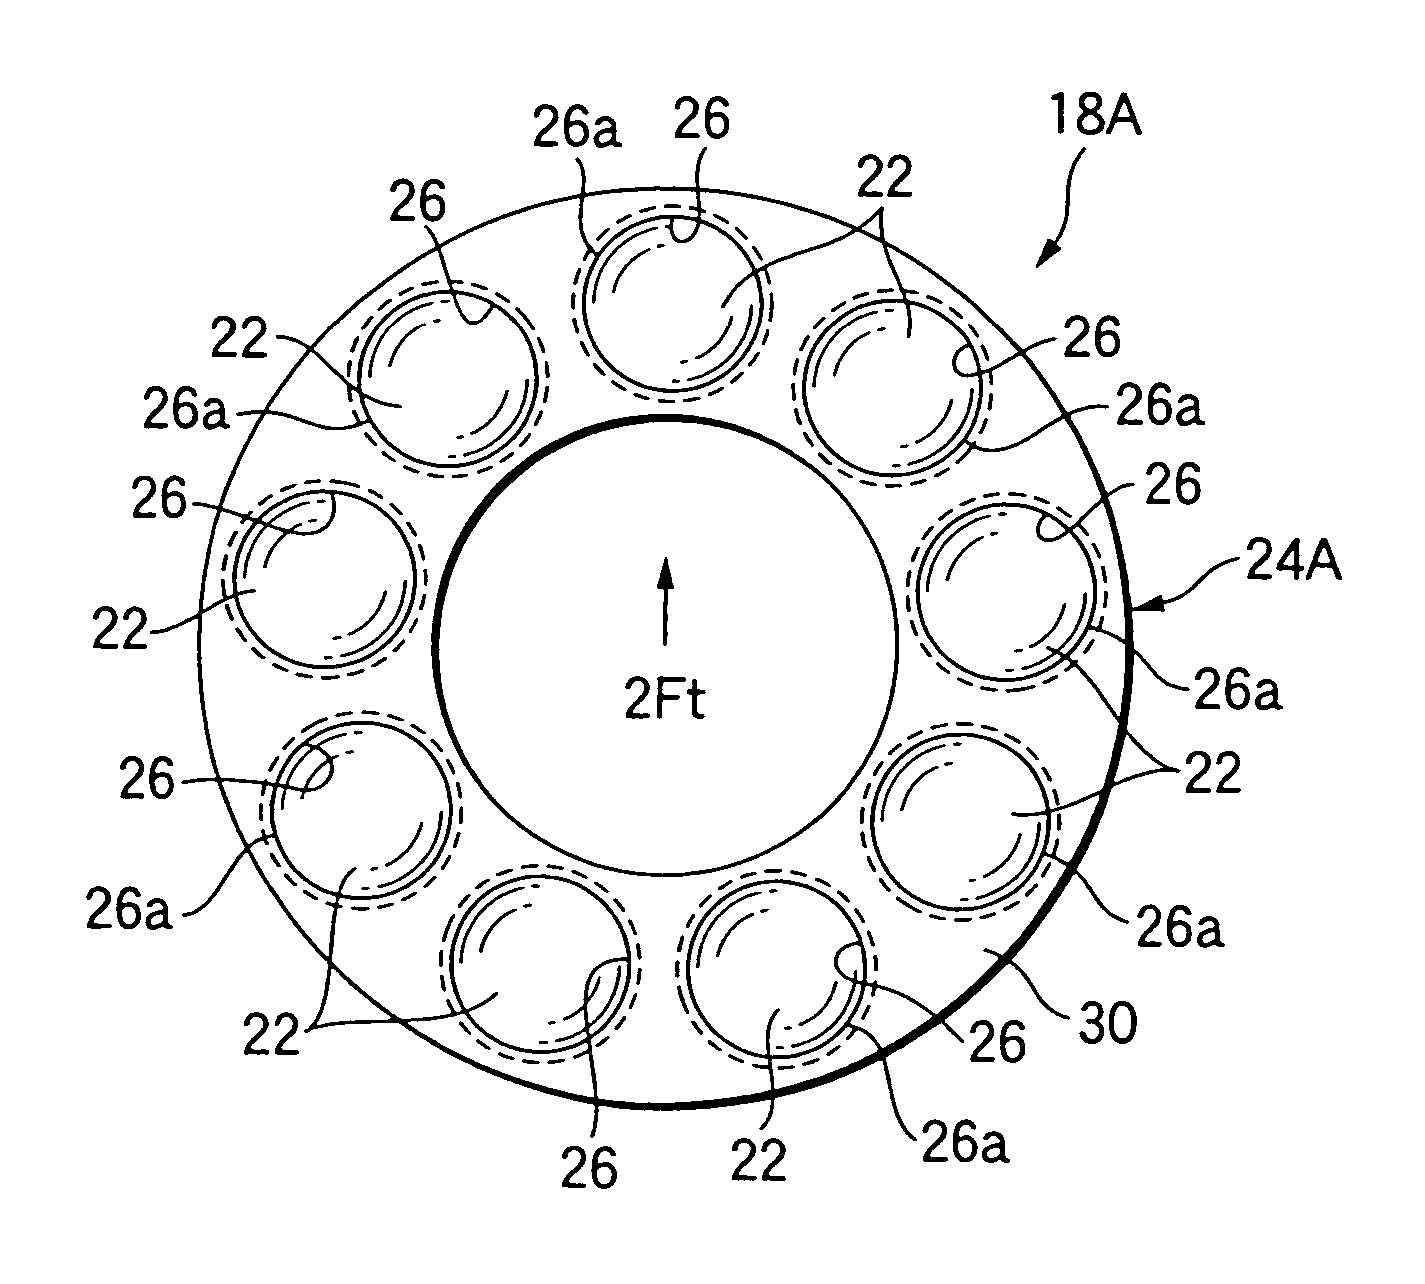 Power roller bearing for toroidal-type continuously variable transmission